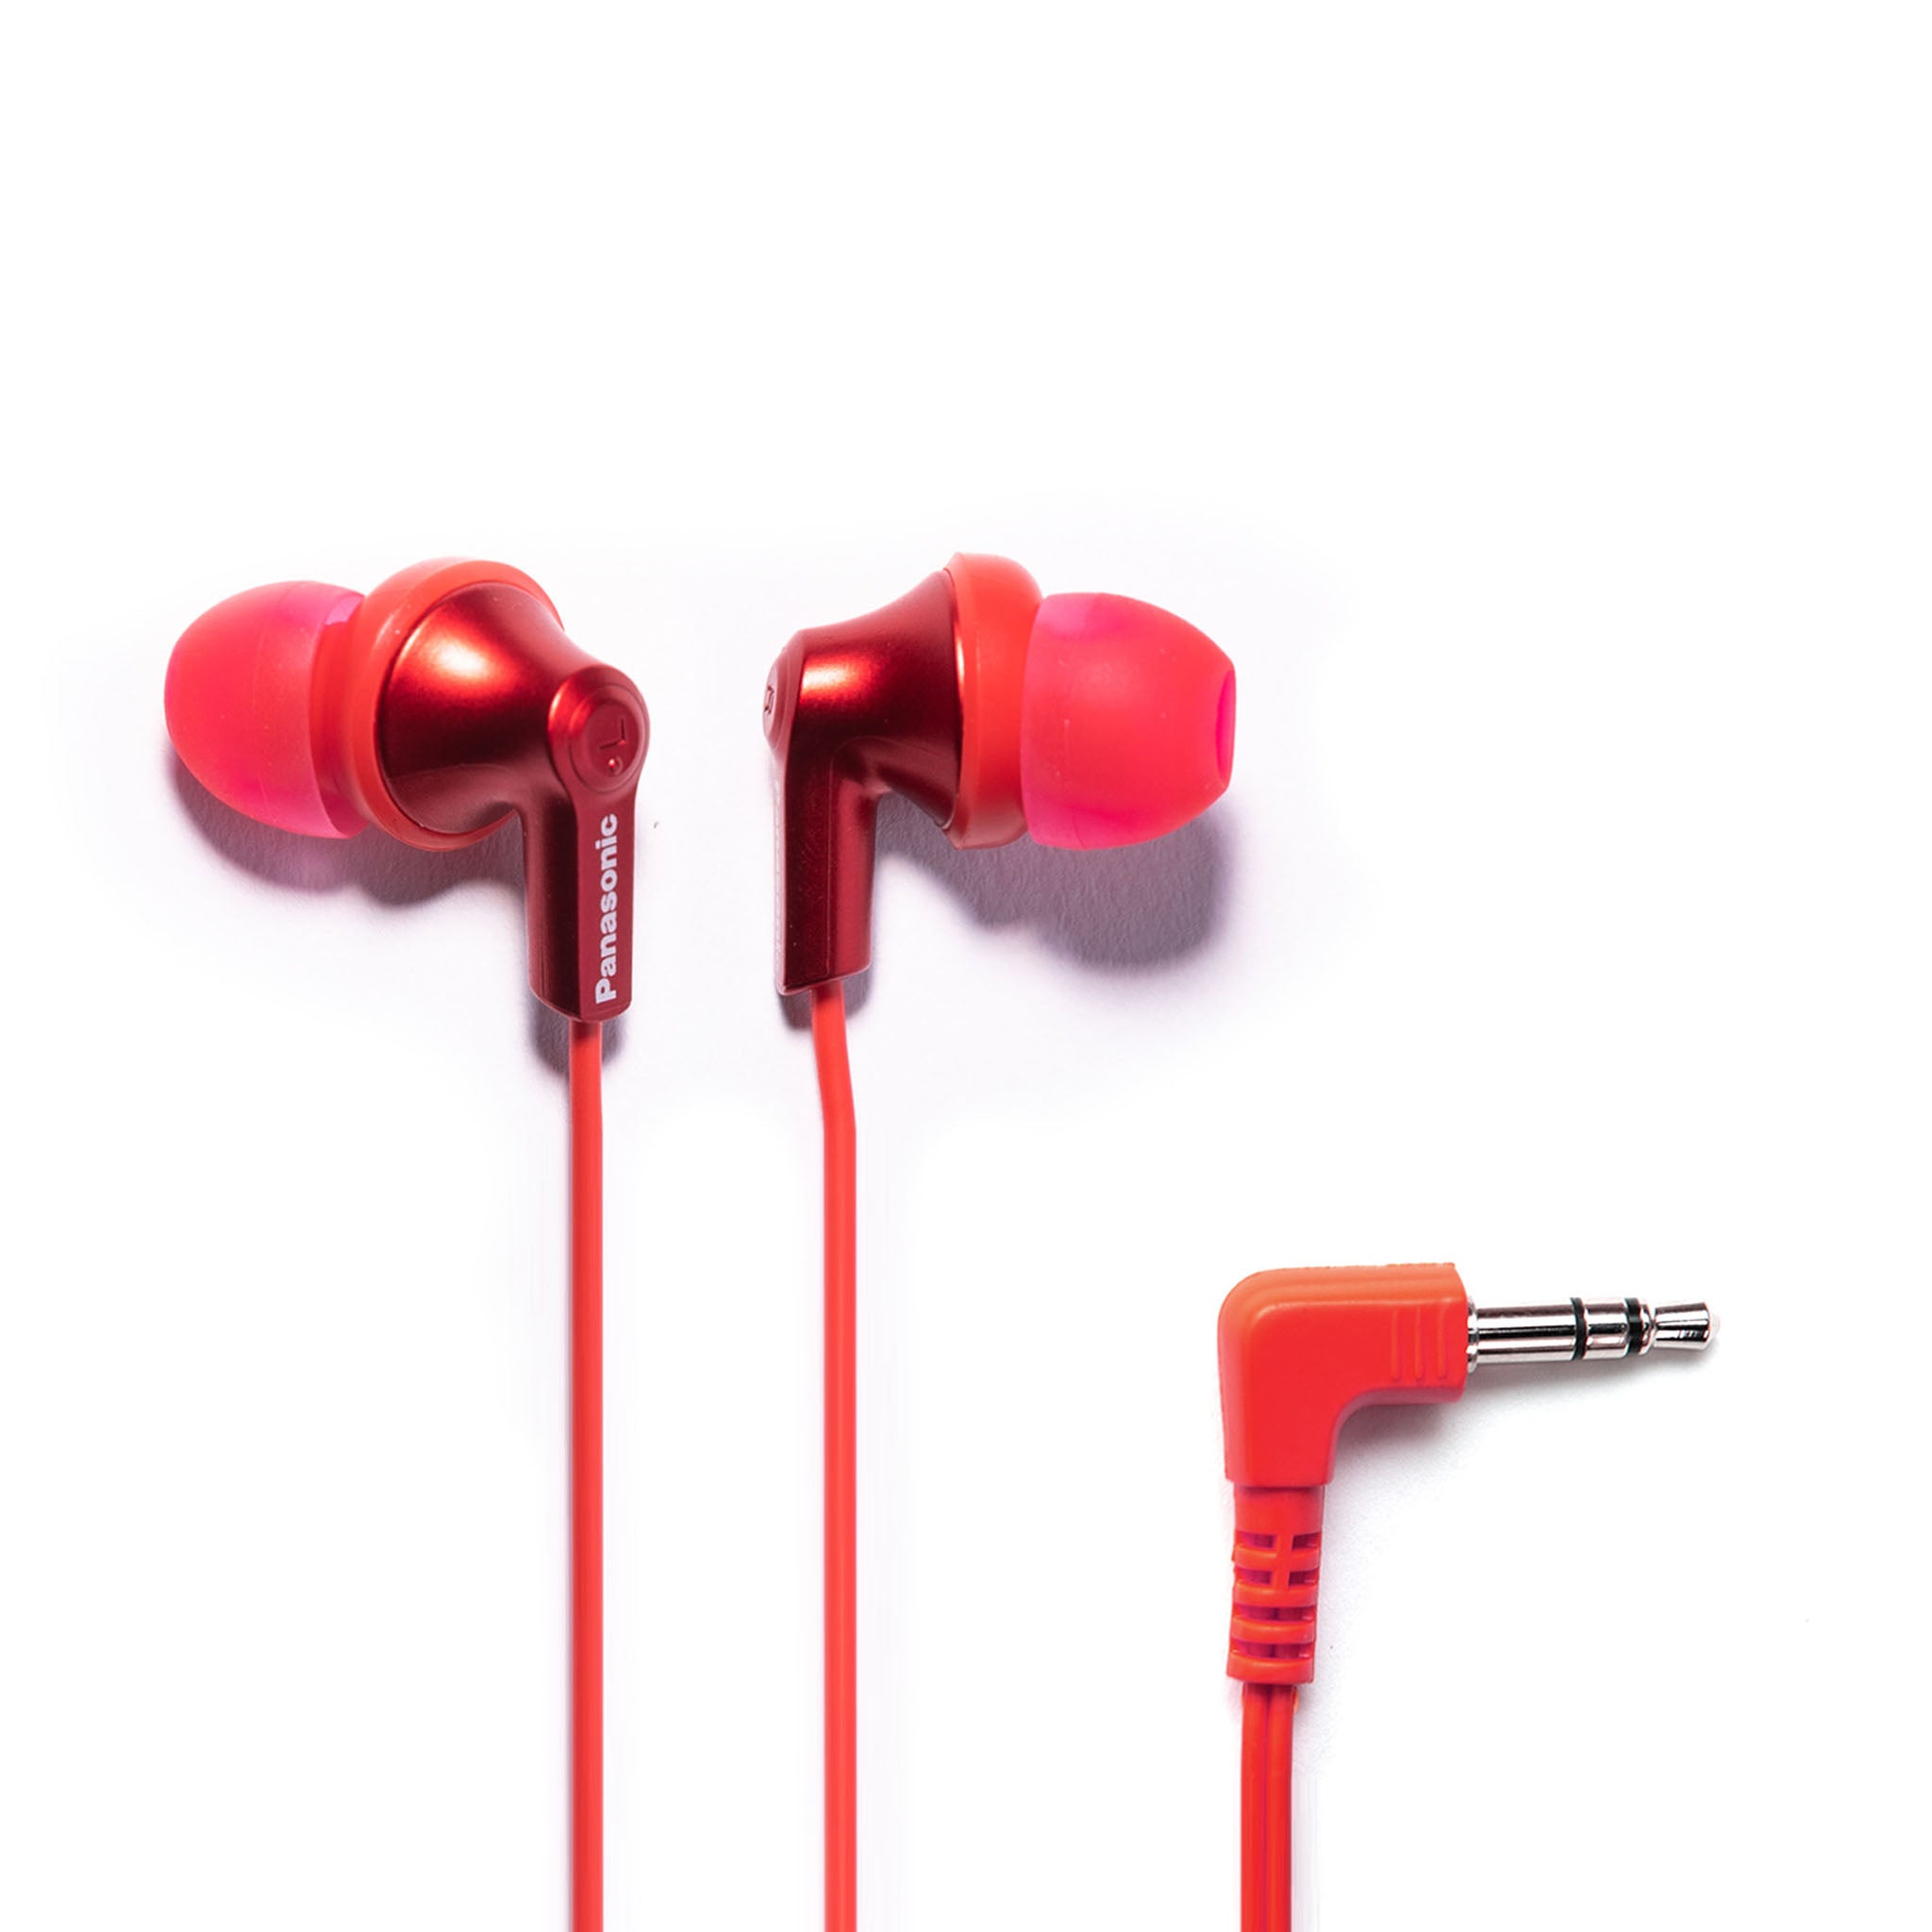 Panasonic and for Earbud Laptops ErgoFit 3.5mm In-Ear Jack with - Headphones Phones RP-HJE120